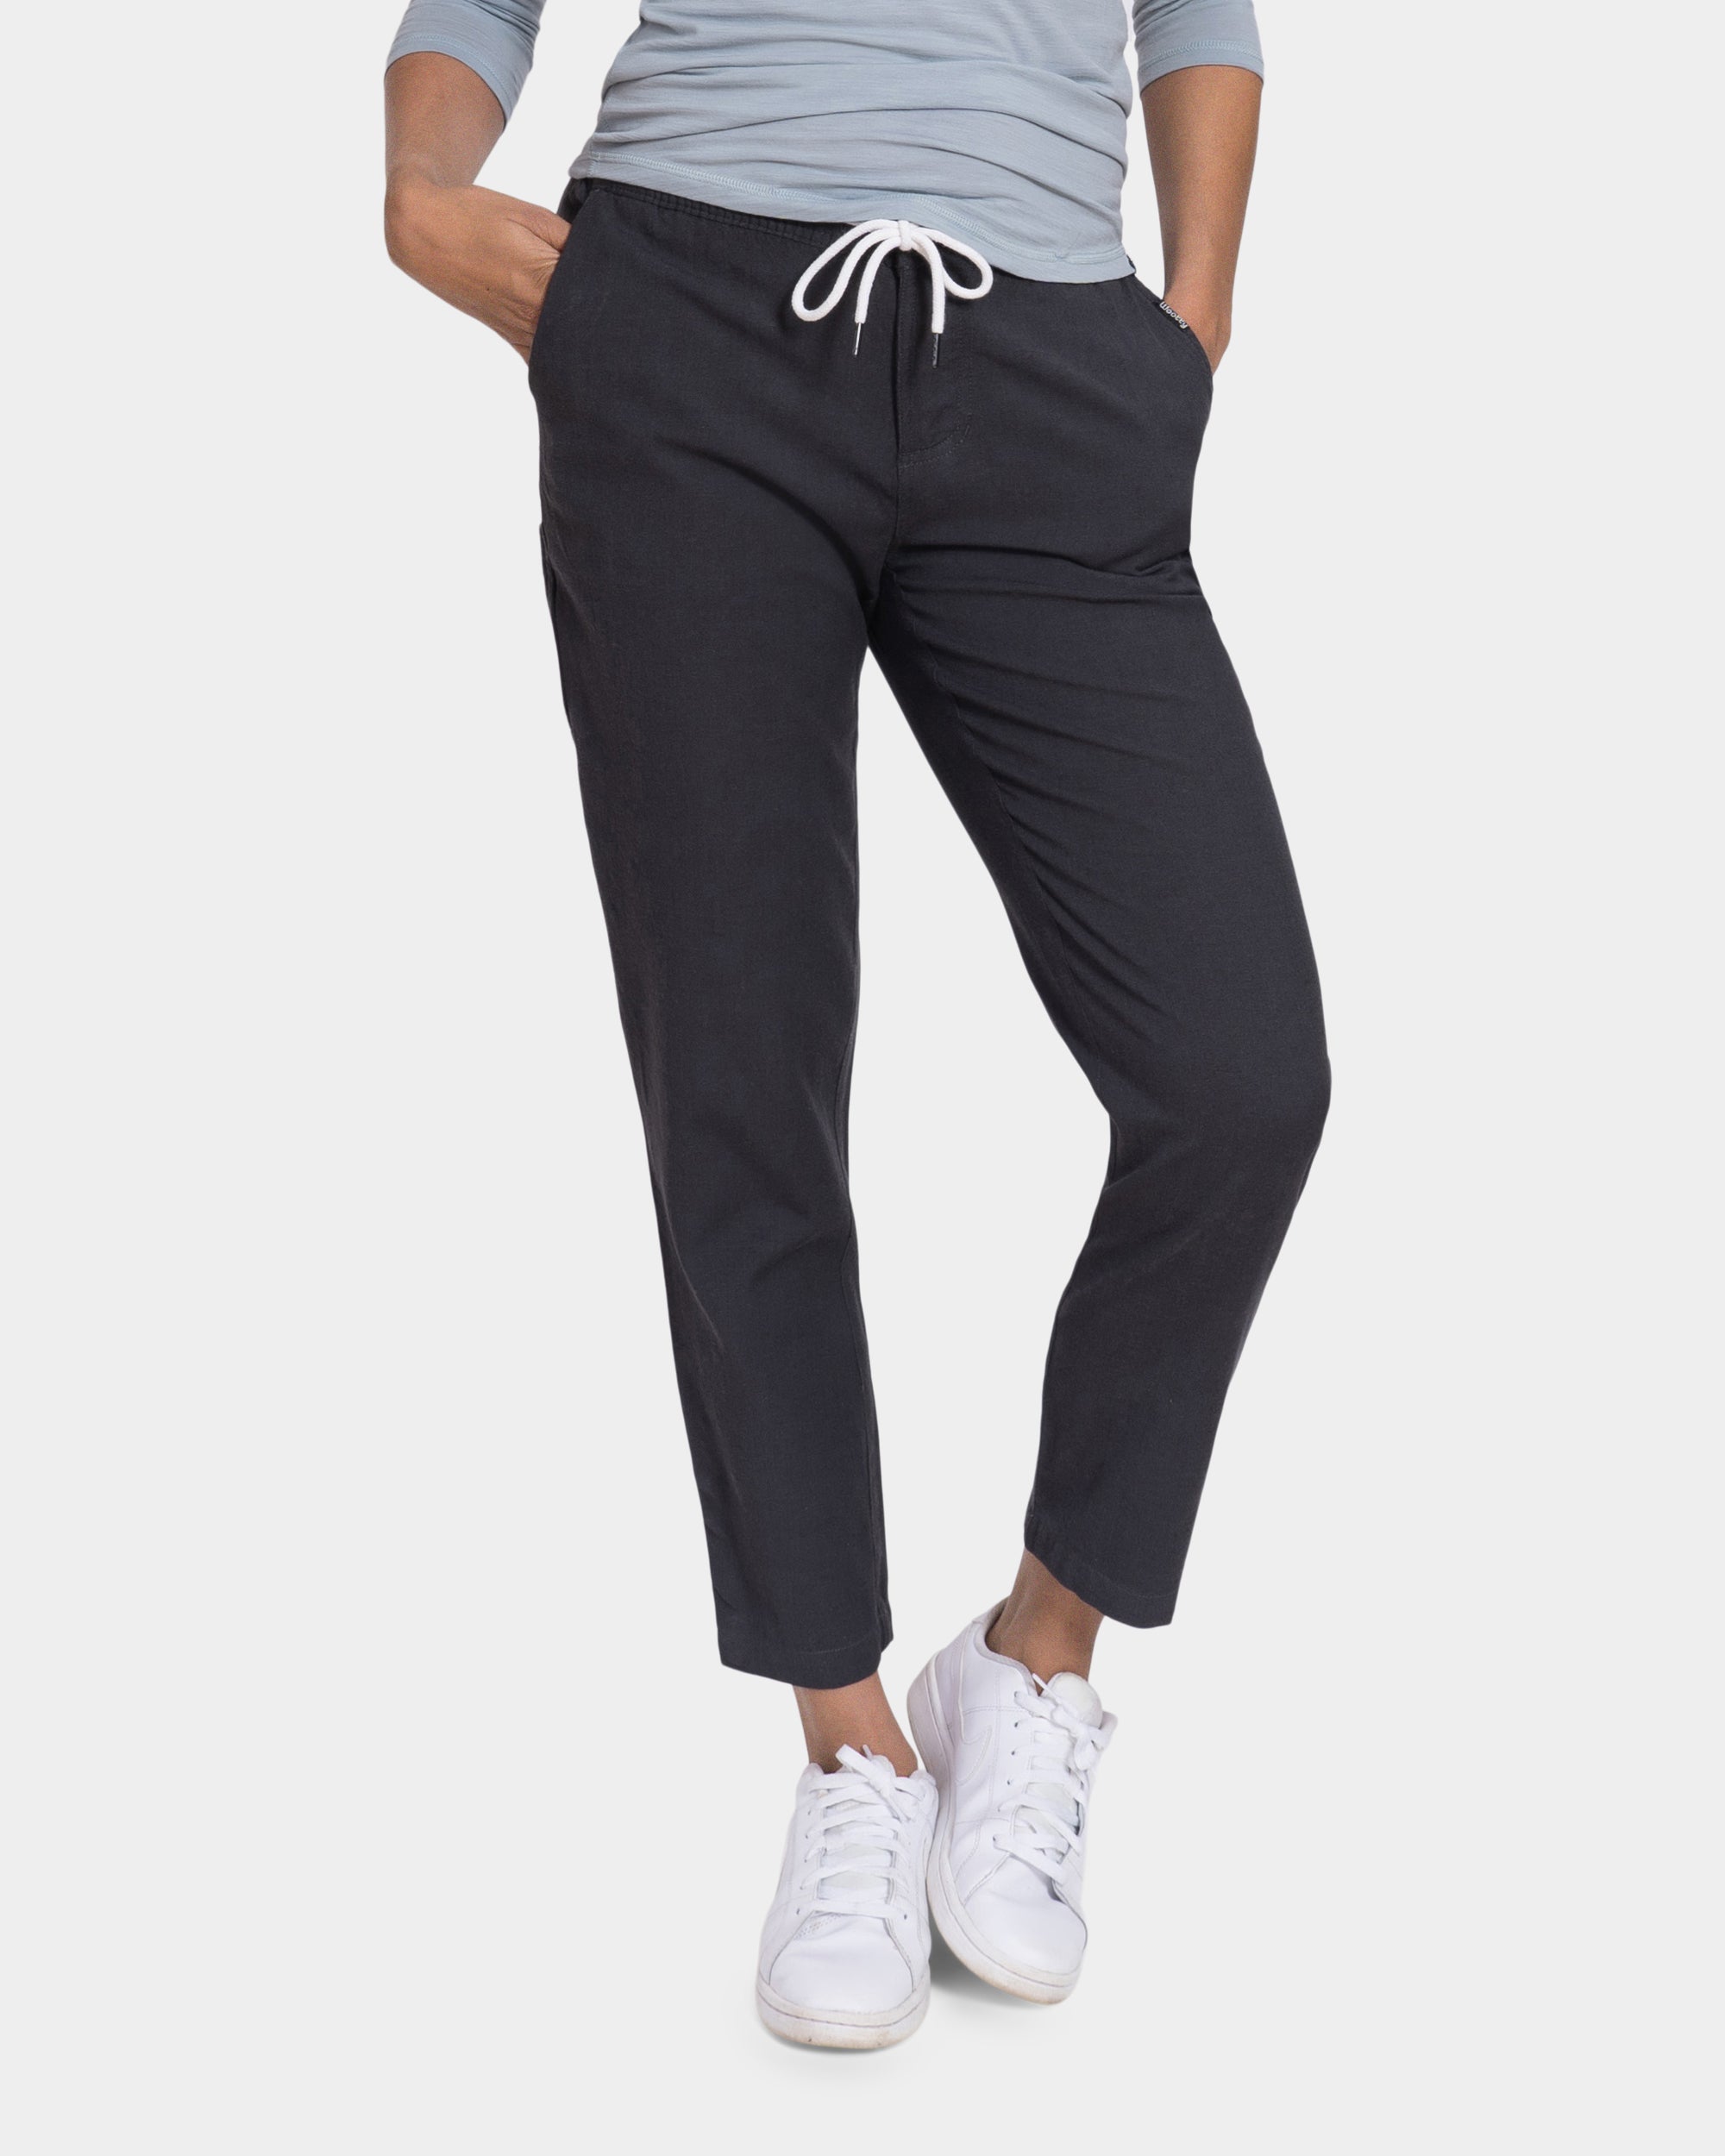 Have these, love them! Great for comfy days and traveling!  Lululemon pants  studio, Celebrity casual outfits, Pants for women